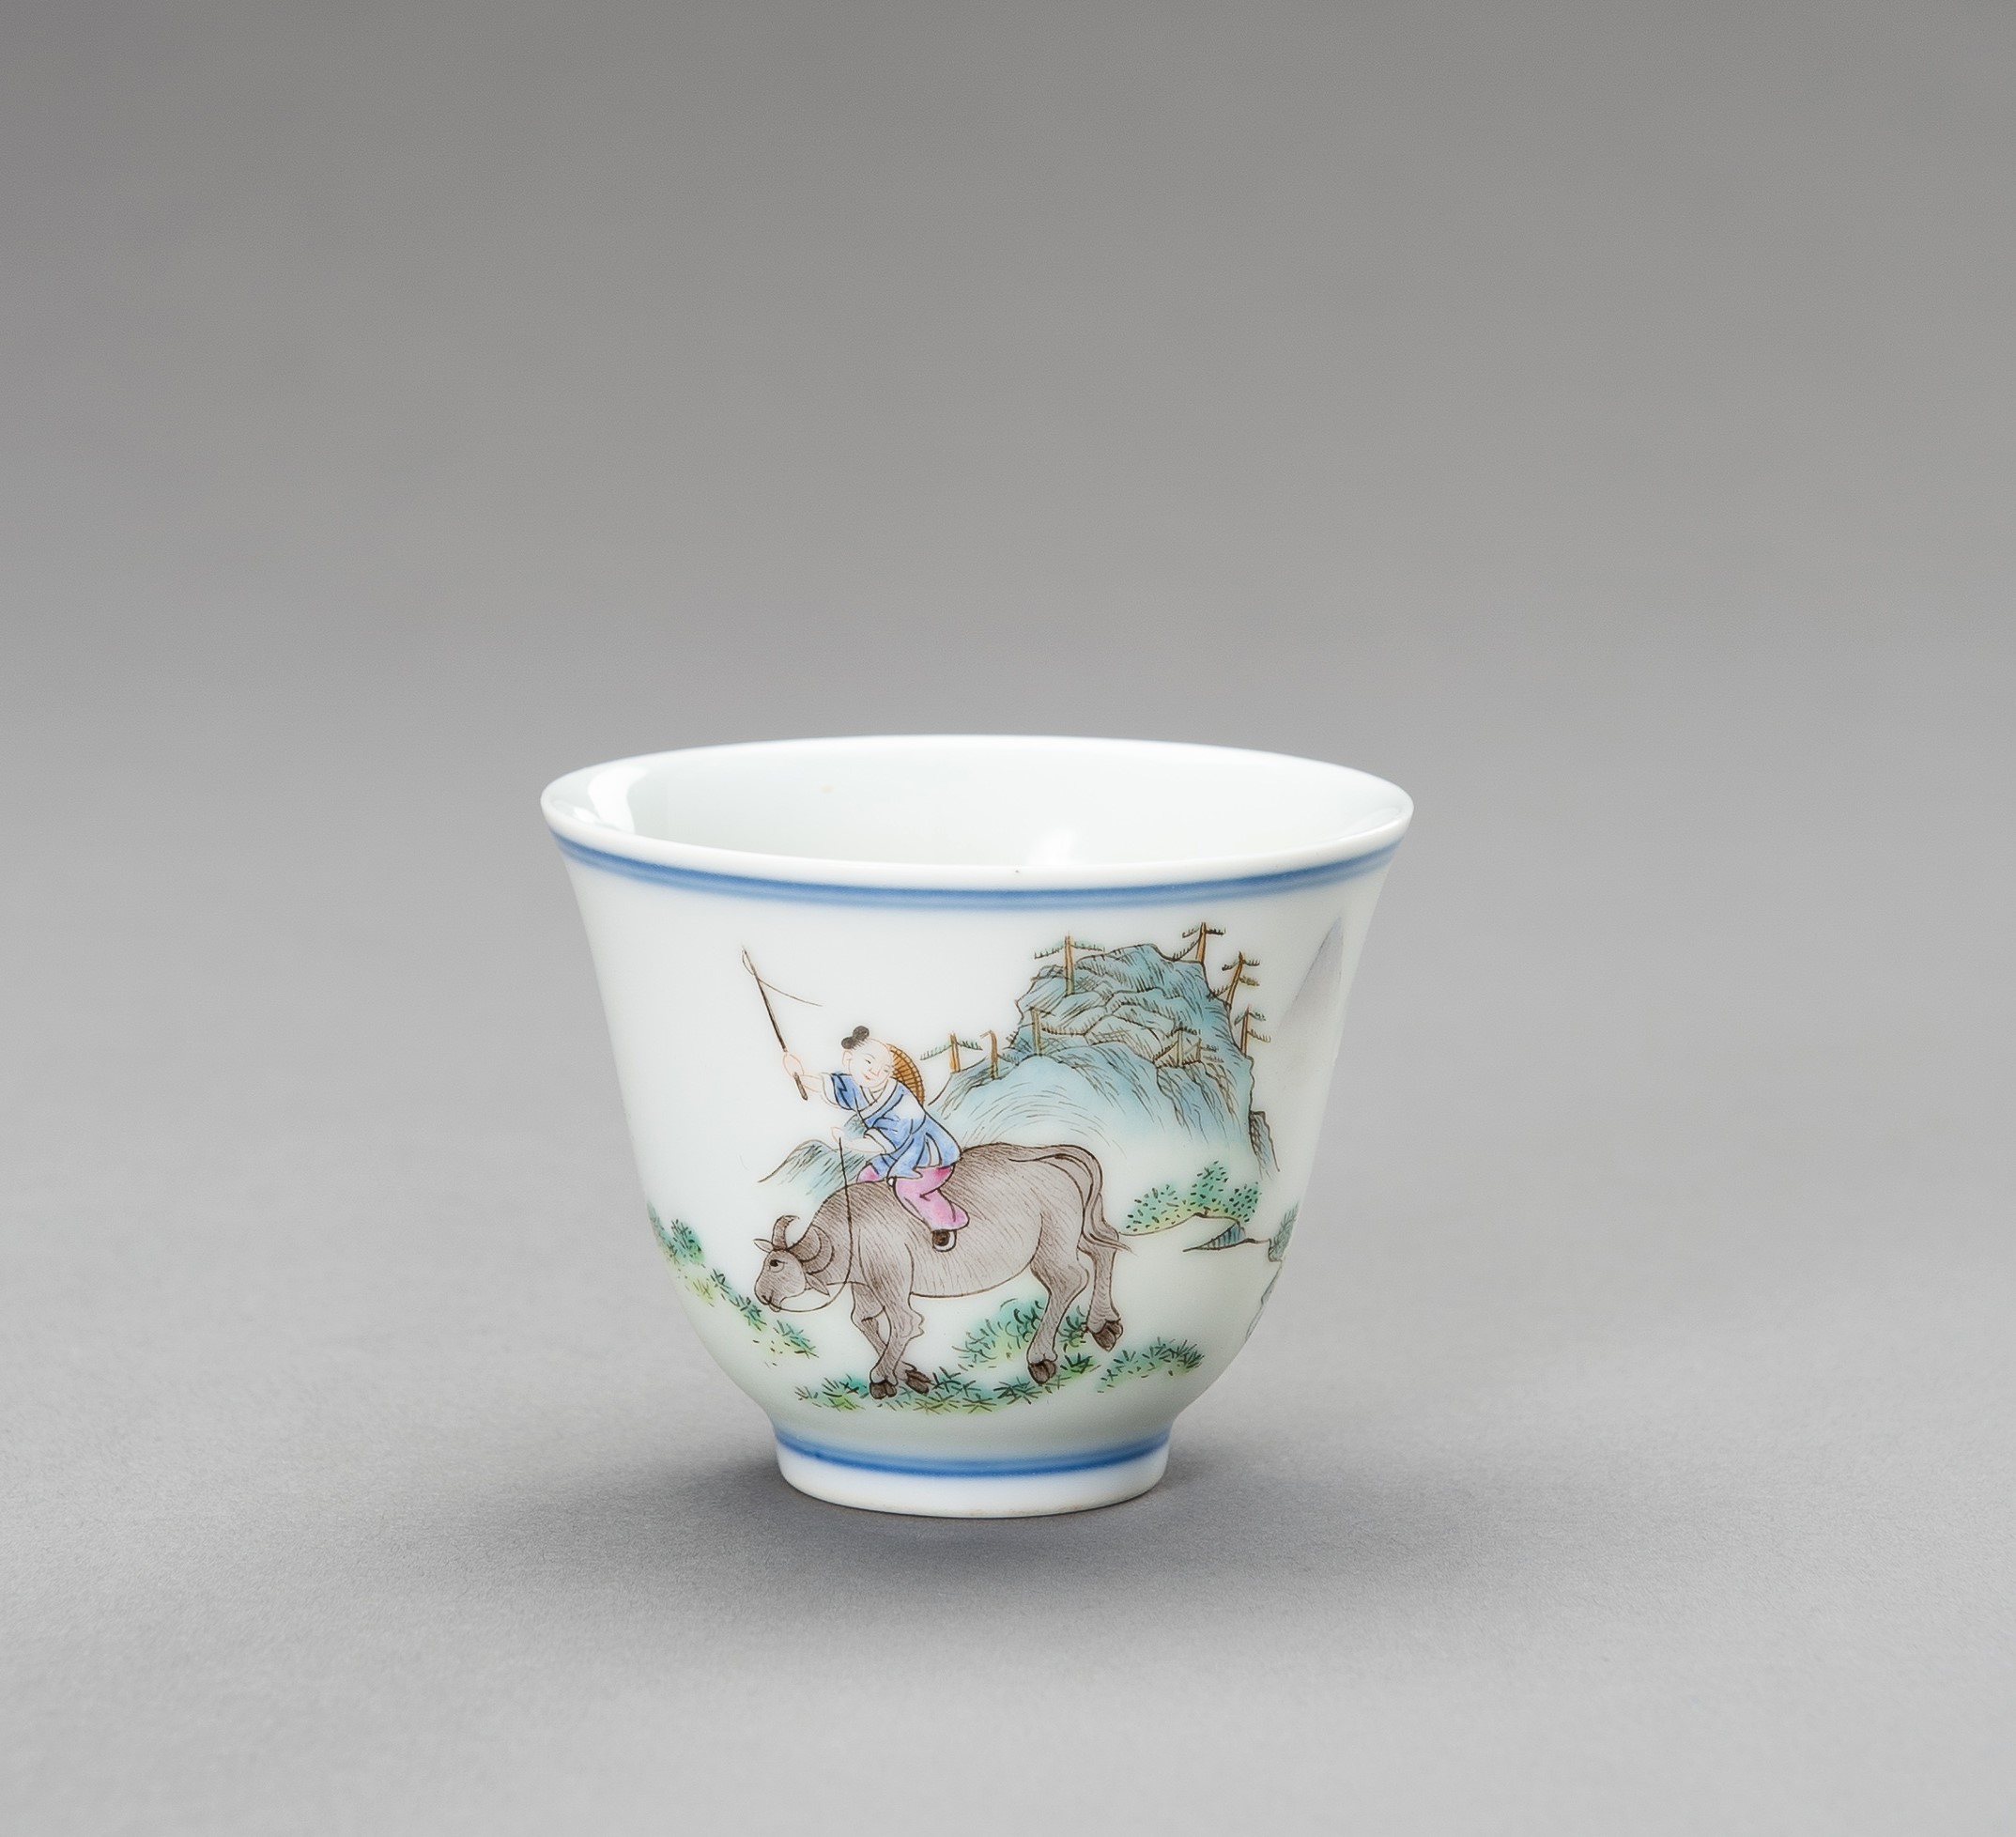 A 'BOY ON OX' PORCELAIN CUP, QING